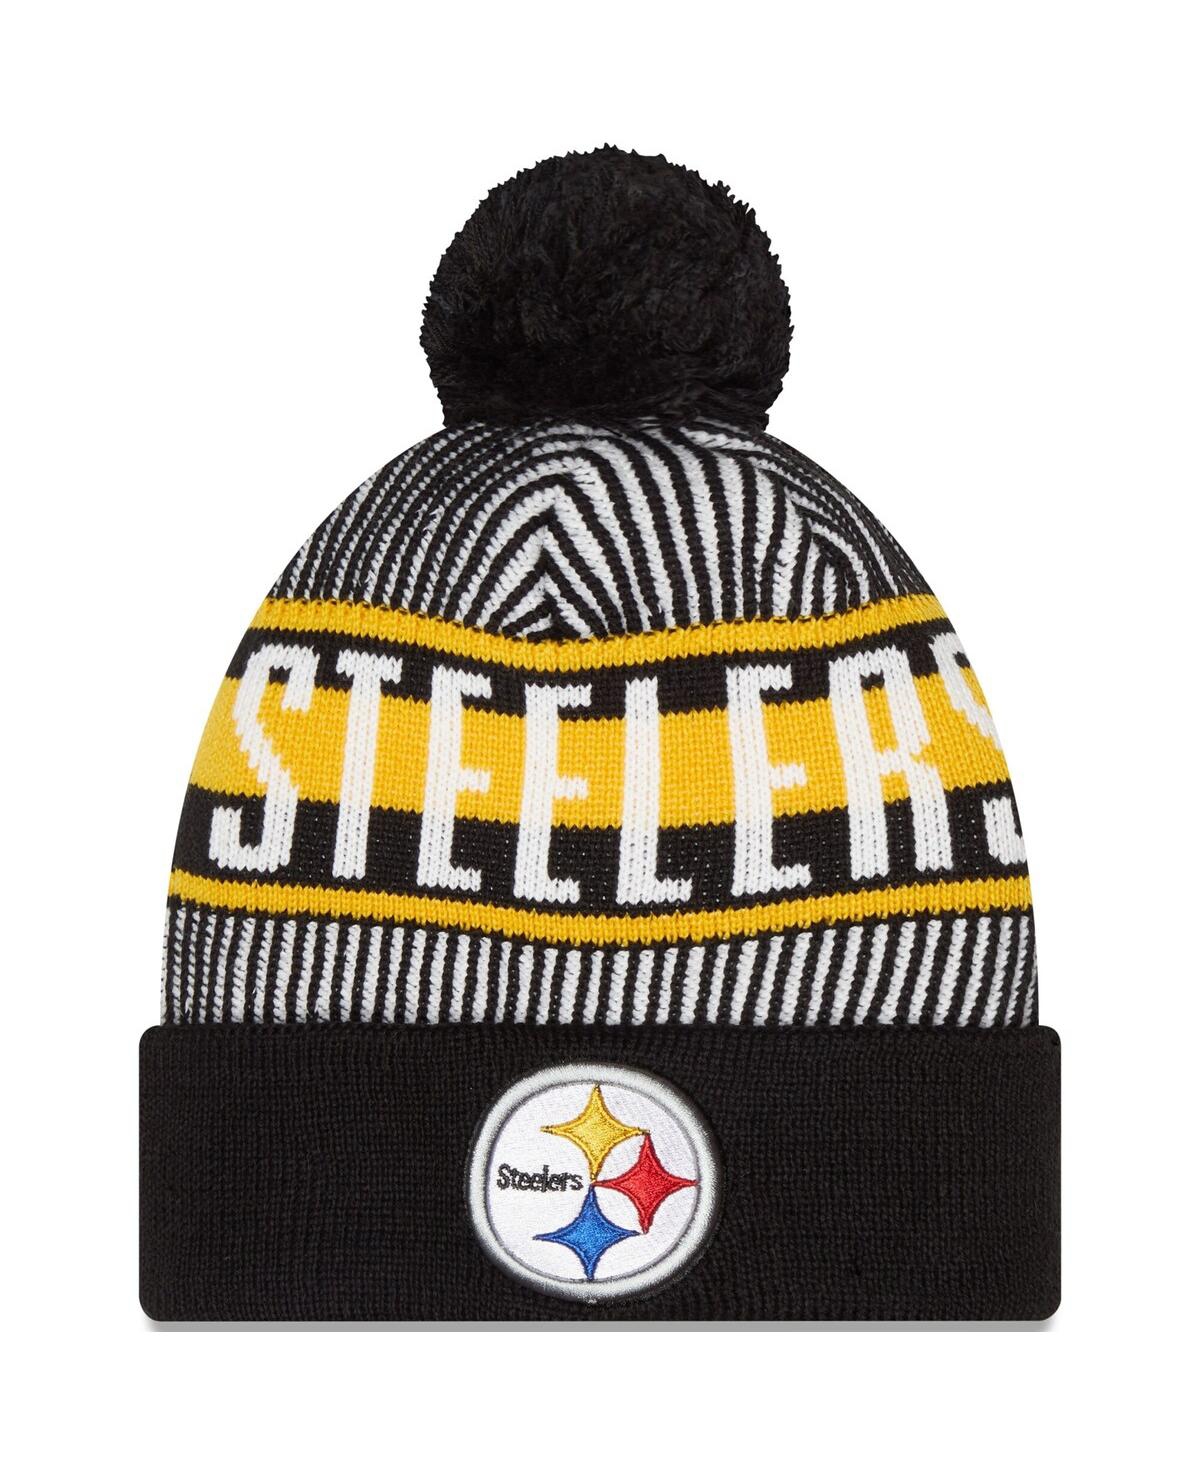 Shop New Era Youth Boys  Black Pittsburgh Steelers Striped Cuffed Knit Hat With Pom